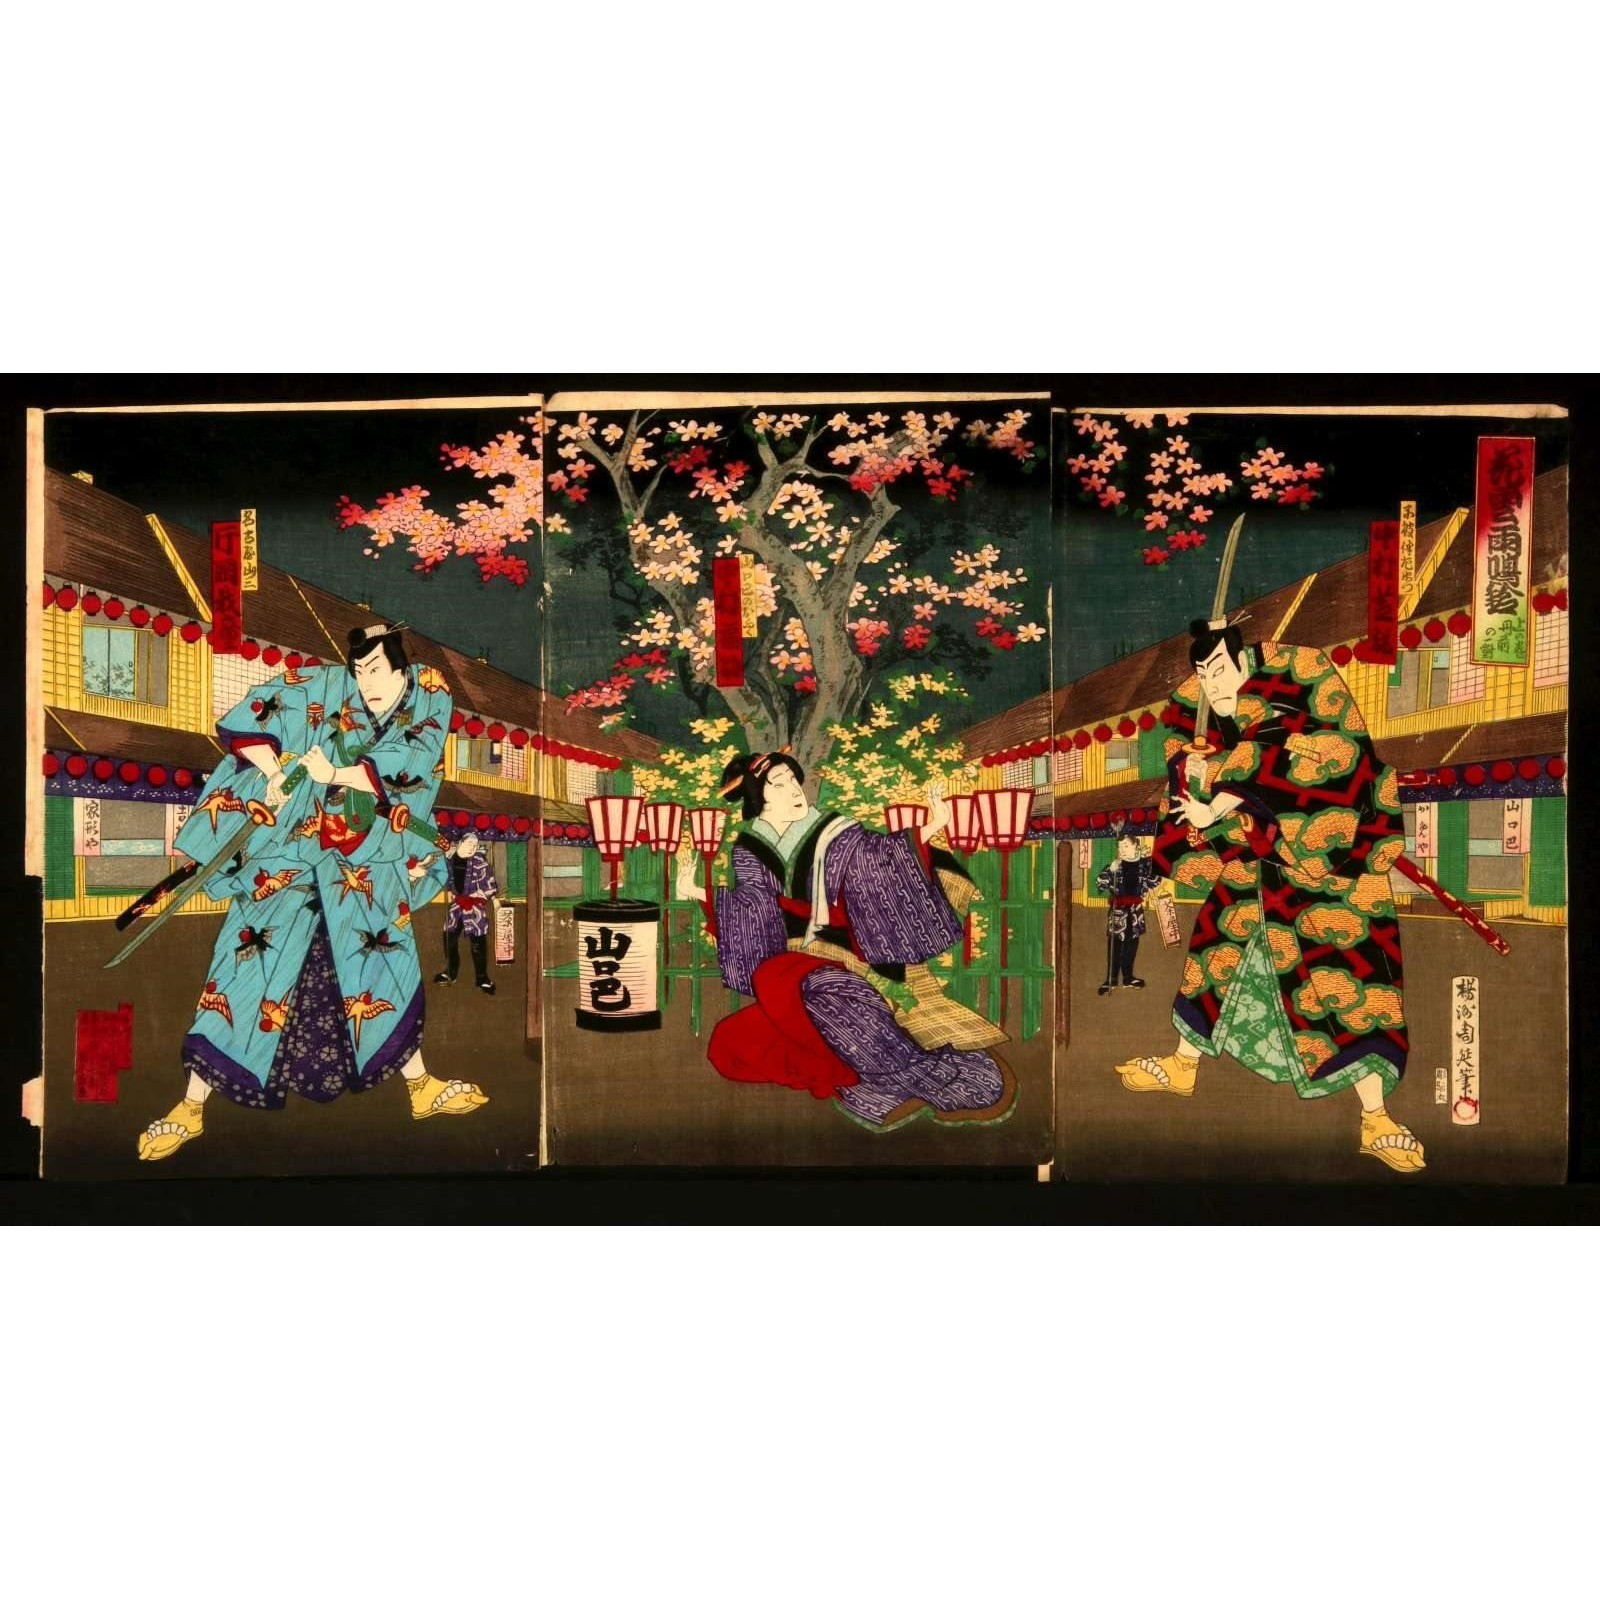 AW10-004: 19TH CENTURY JAPANESE WOODBLOCK TRIPTYCH PRINT